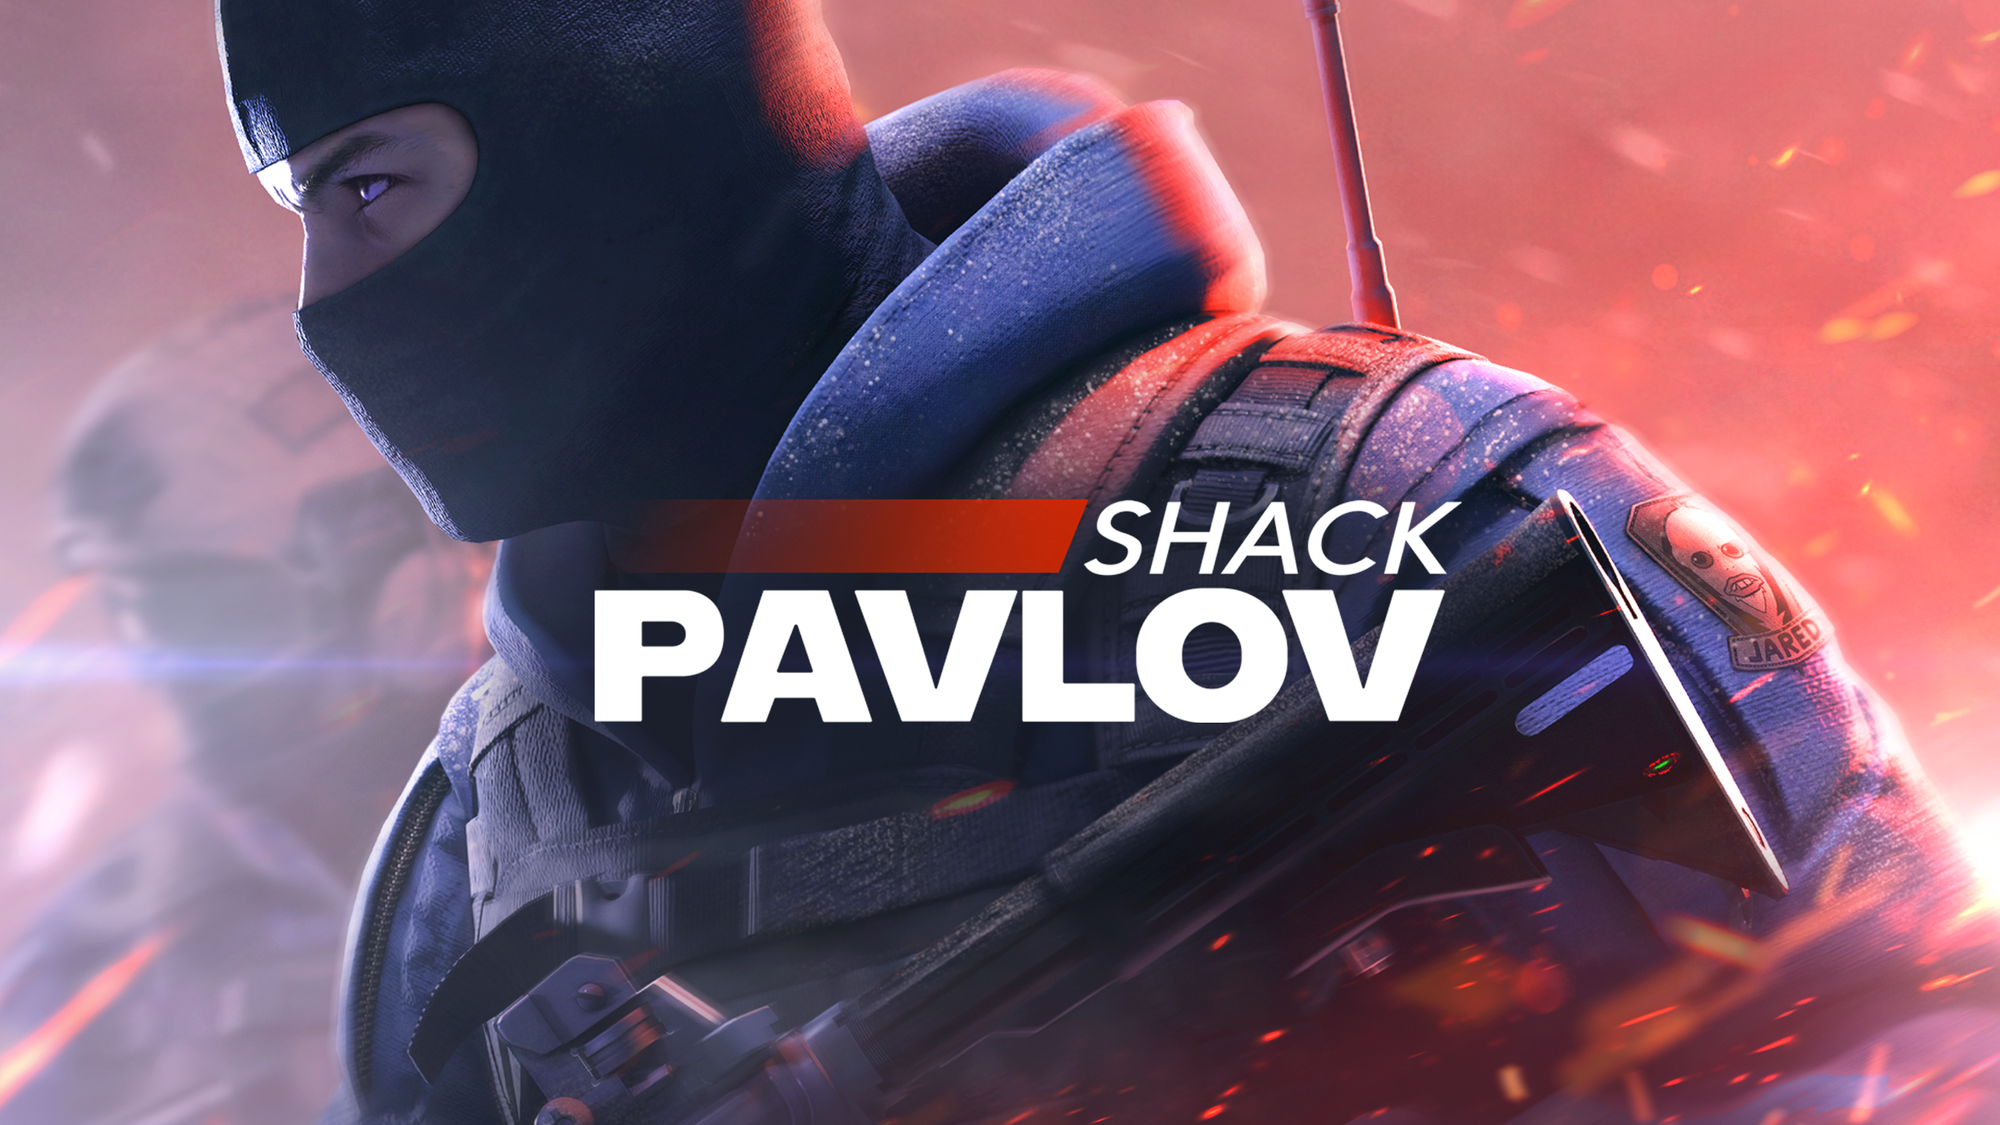 Pavlov Shack: Your Ticket to VR Fun is Now Available on Quest Store